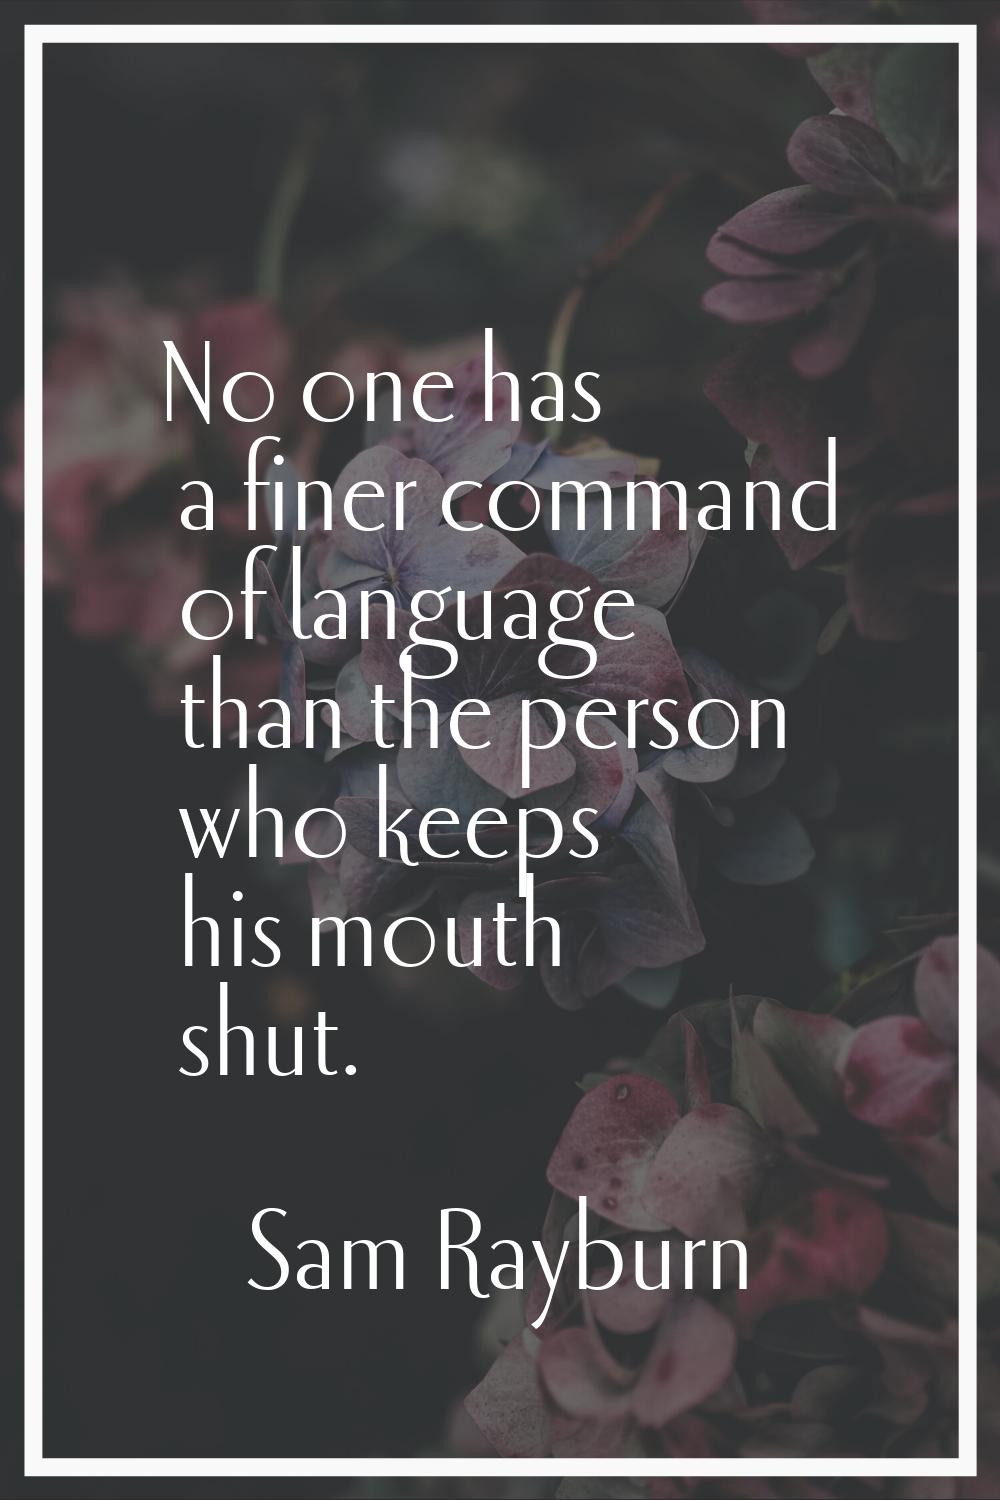 No one has a finer command of language than the person who keeps his mouth shut.